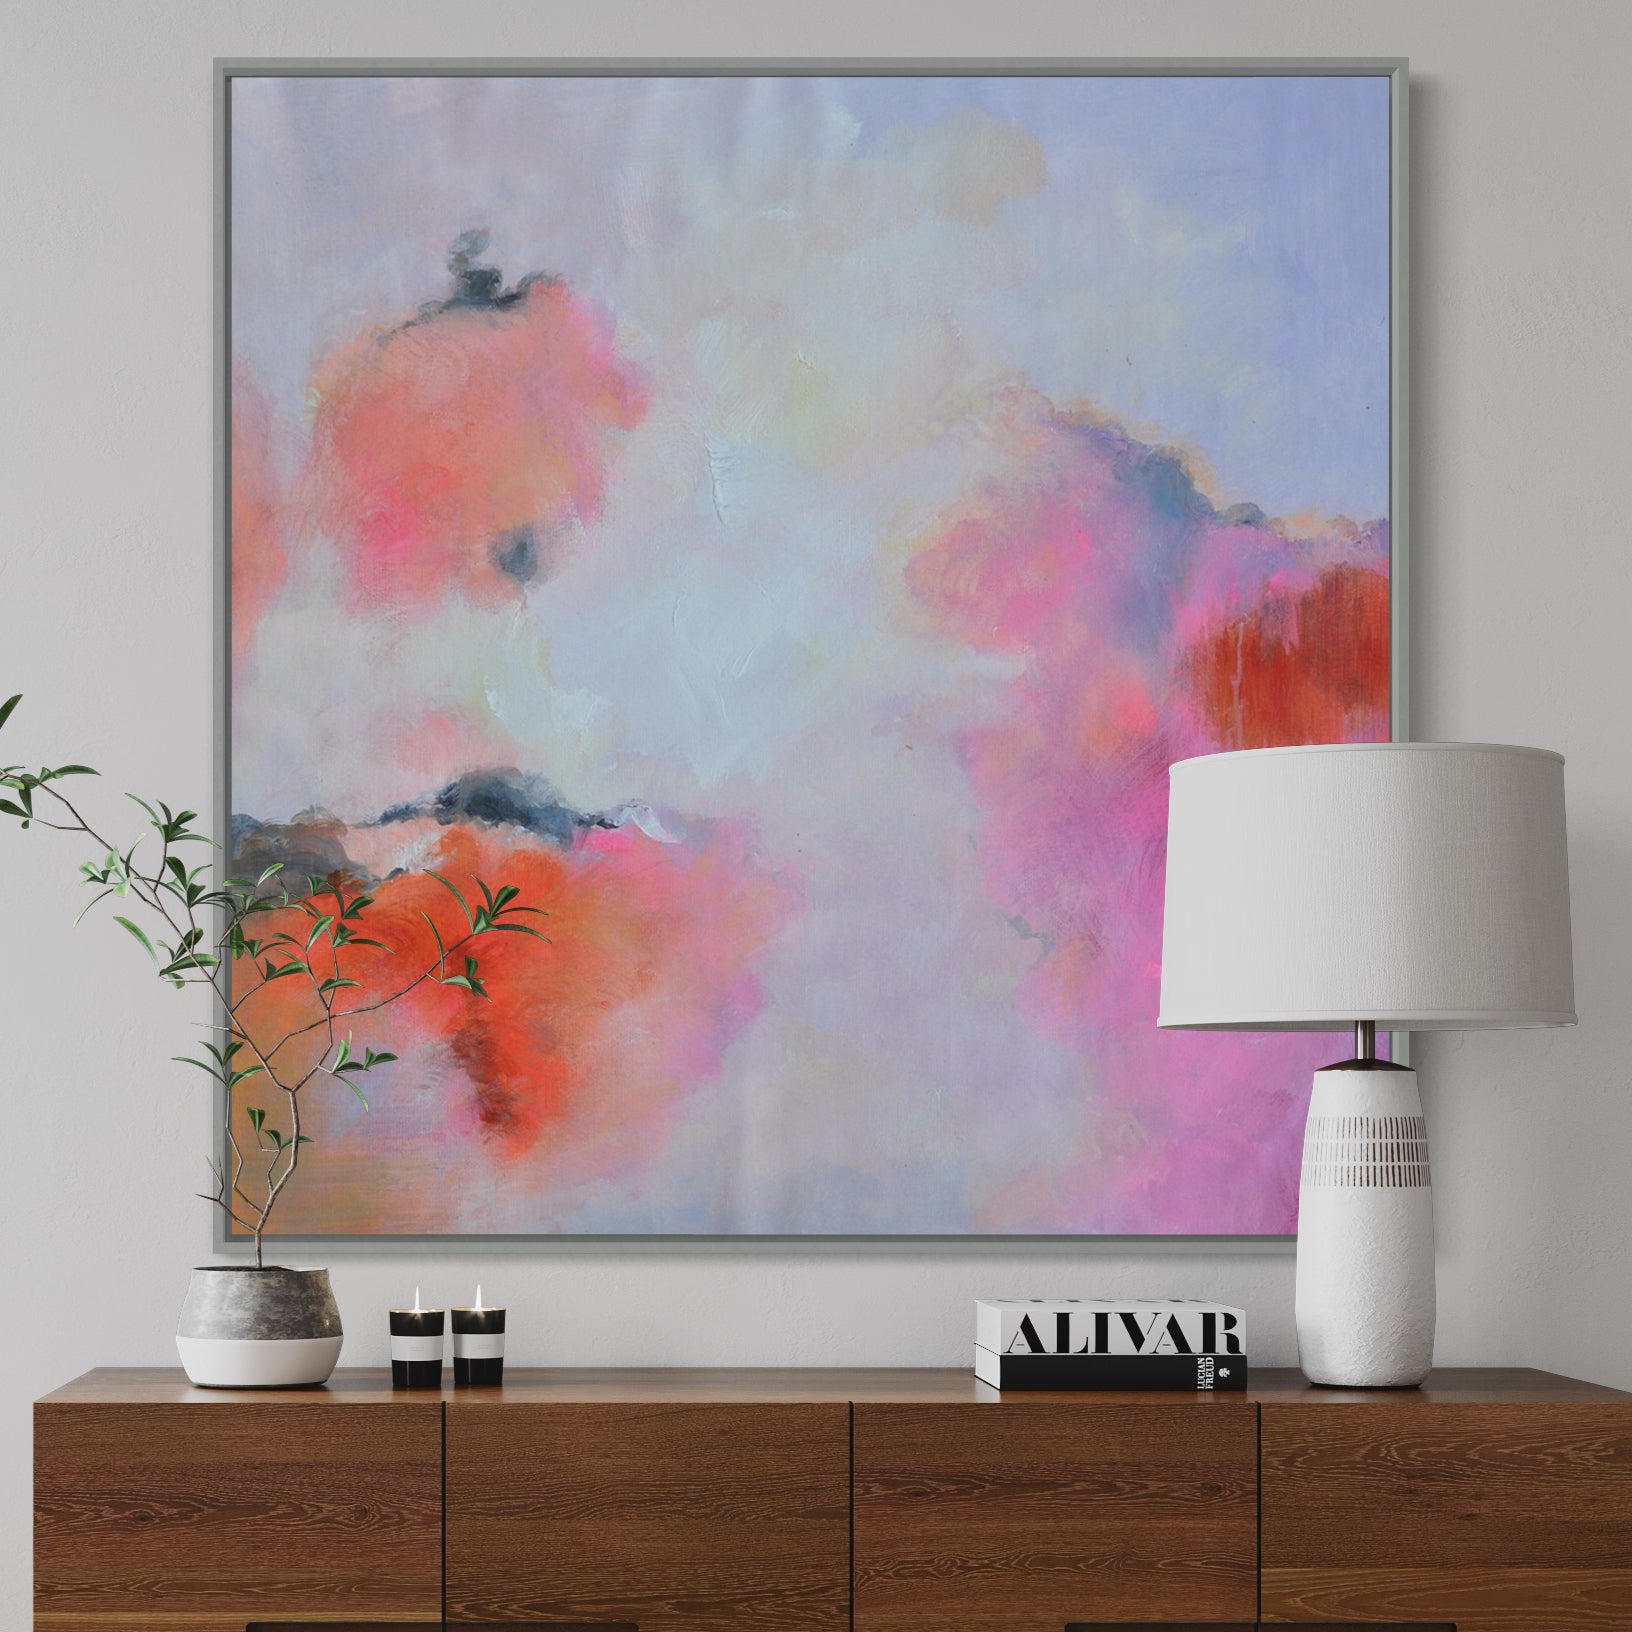 Cotton Candy, Black And Golden / 180x180cm